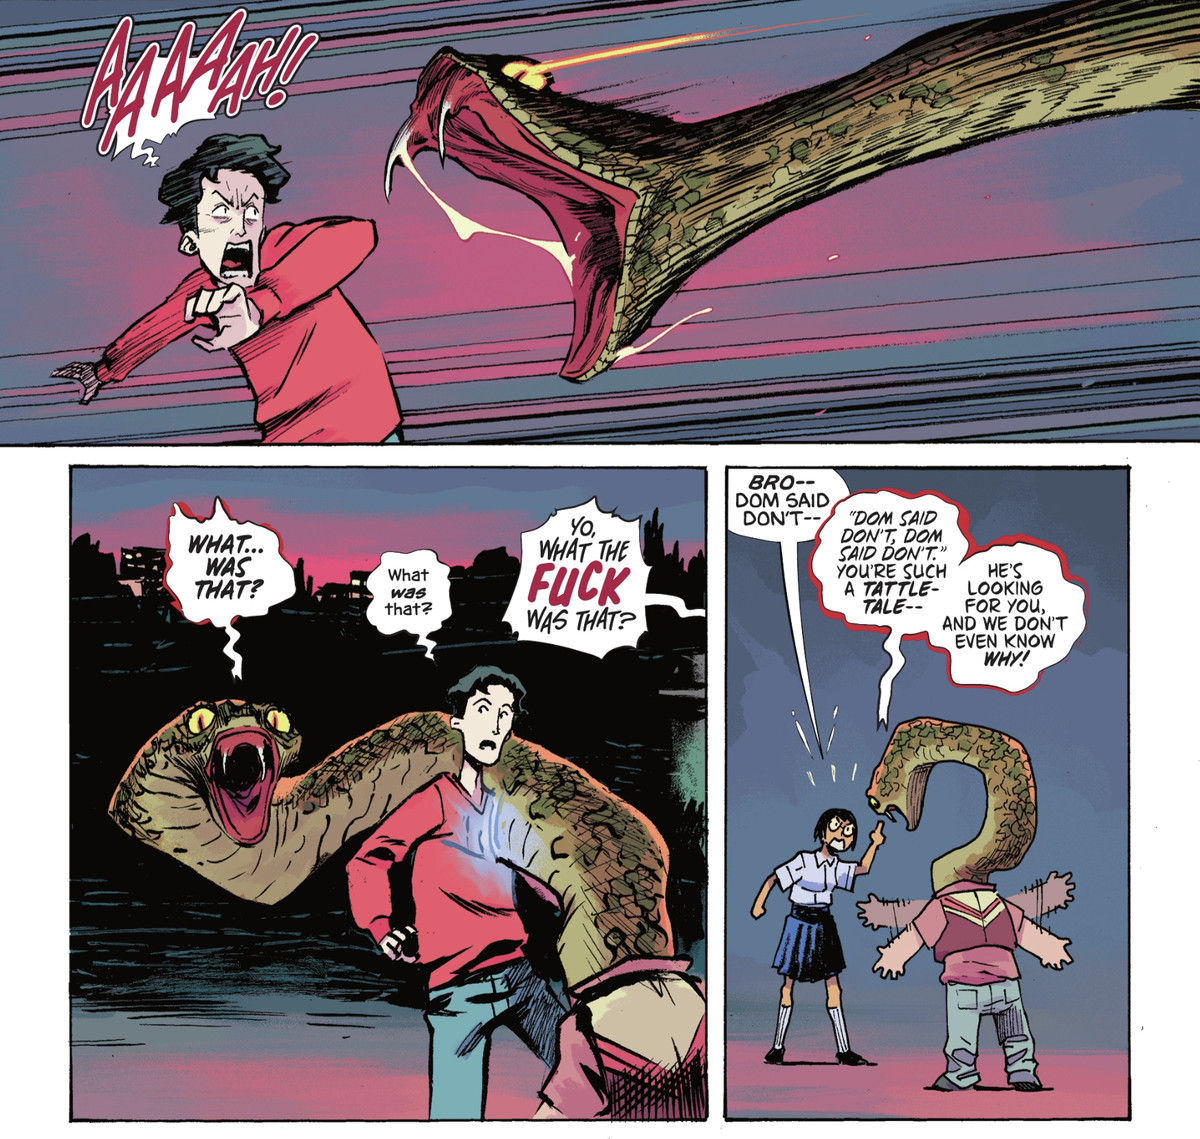 A giant snake suddenly attacks a screaming boy — and passes right through him because they are both ghosts. In fact the giant snake is actually coming out of the neck of a normal boy ghost. “What the fuck was that?!” they both yell. “Bro,” a girl yells at the snake boy, “Dom said don’t —” He protests back at her, his snake head wobbling and his arms gesturing emphatically and hilariously in The Sandman Universe: Dead Boy Detectives #1. 